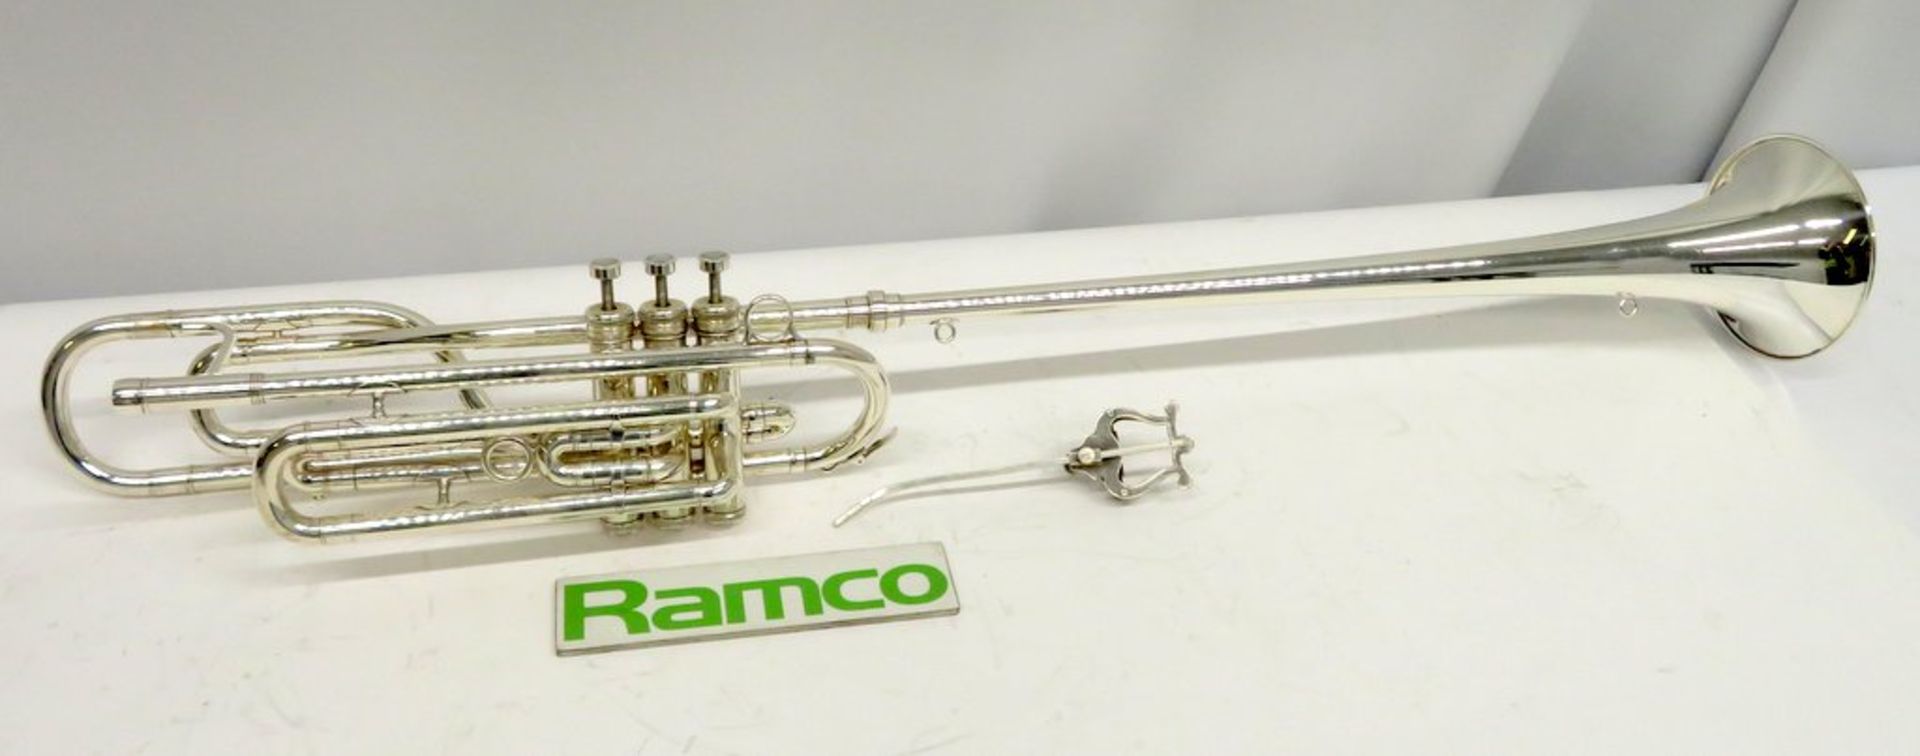 Besson International BE707 Fanfare Trumpet Complete With Case. - Image 4 of 15